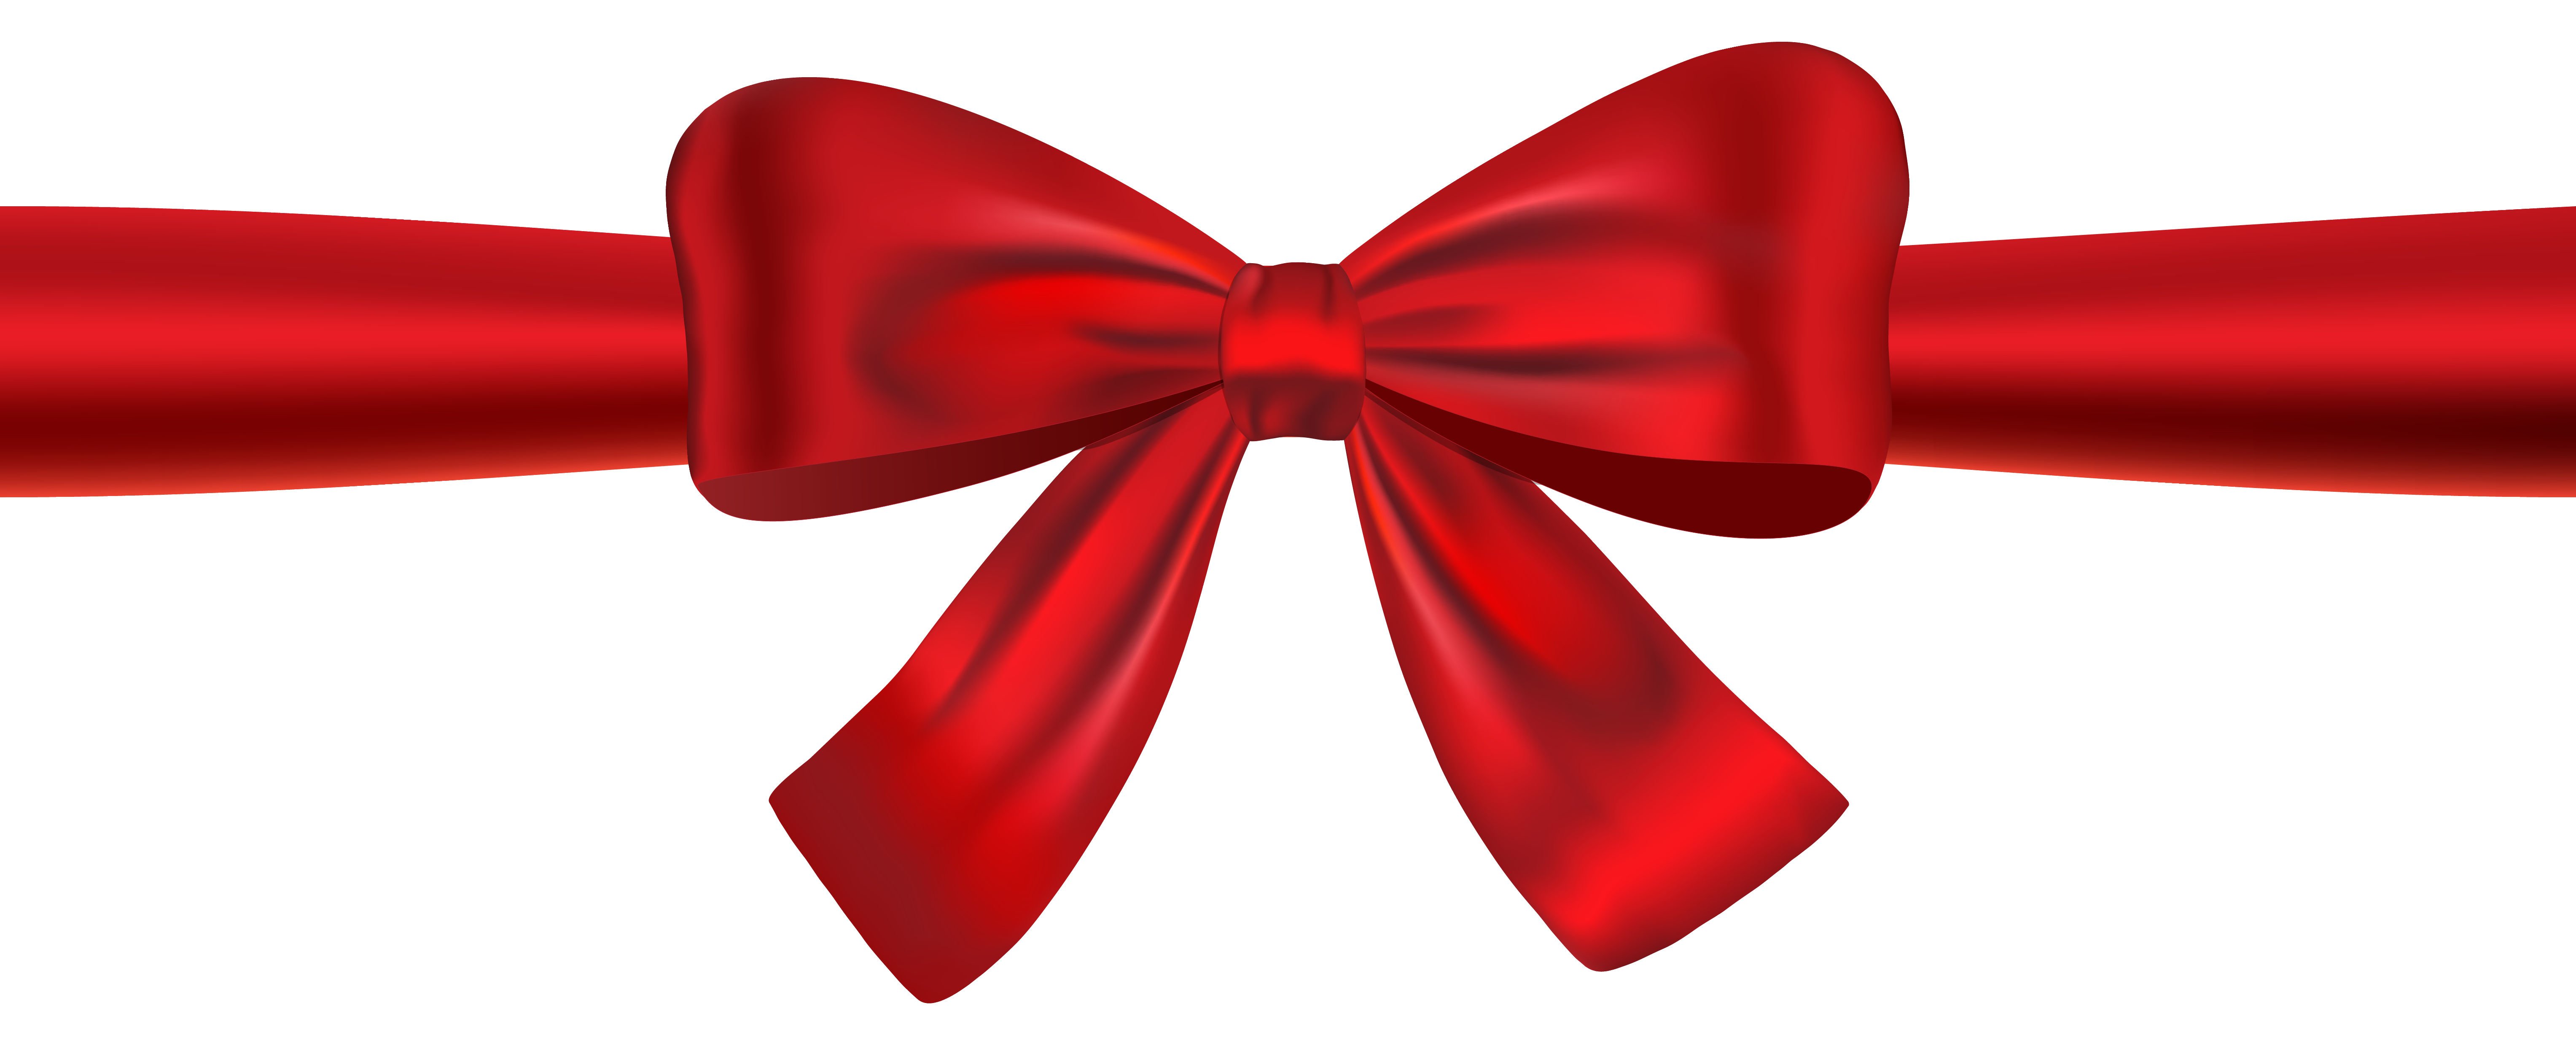 Red bow clipart transparent 